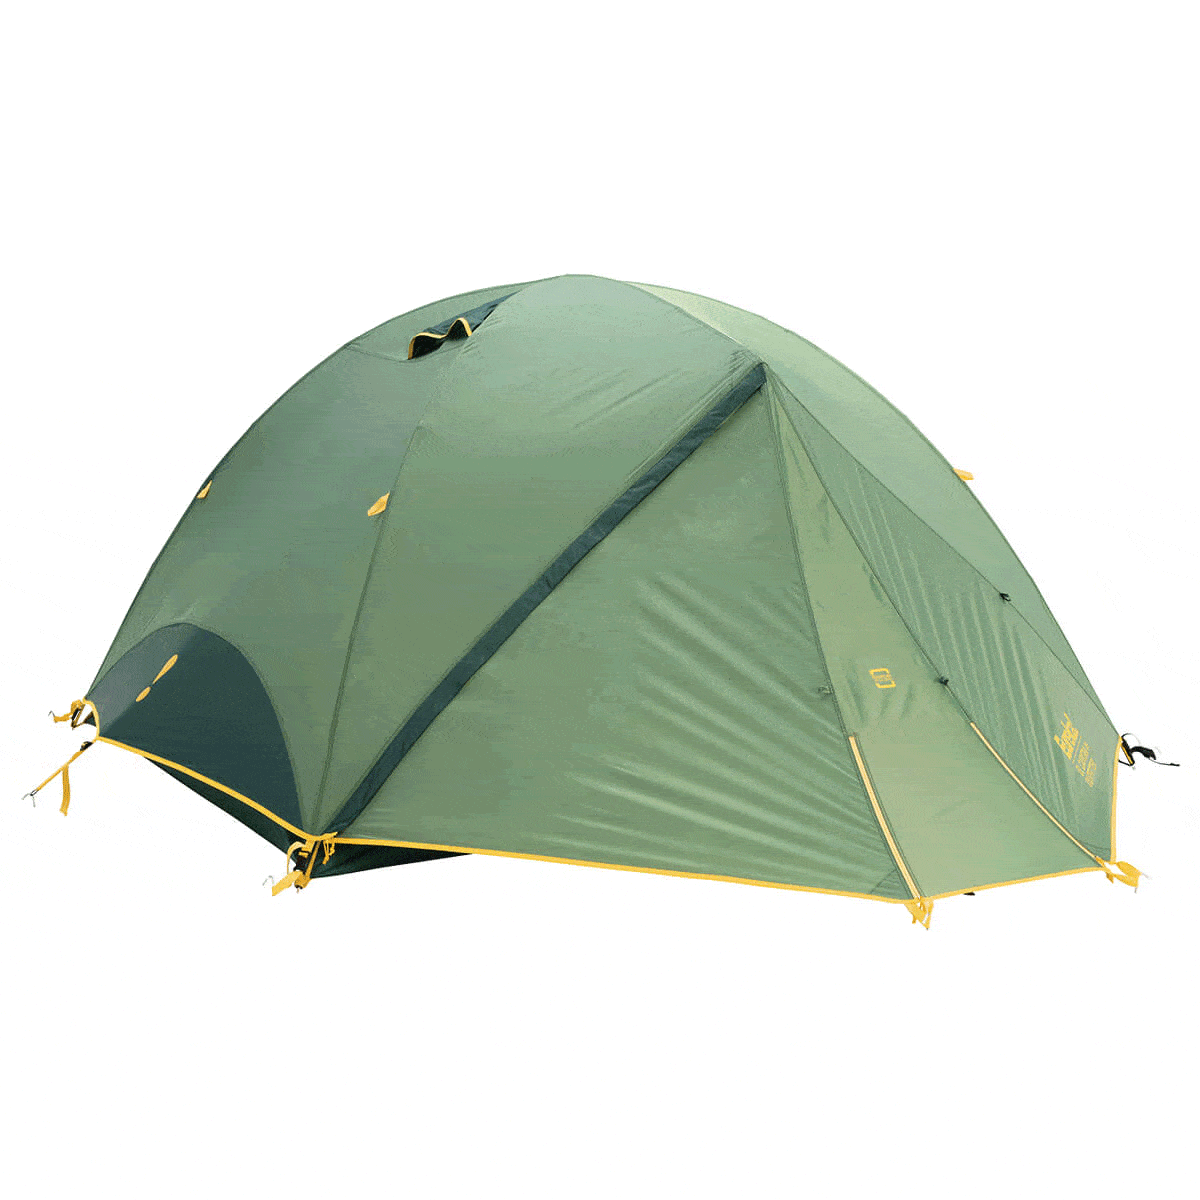 Eureka! El Capitan Outfitter Tent with rainfly on